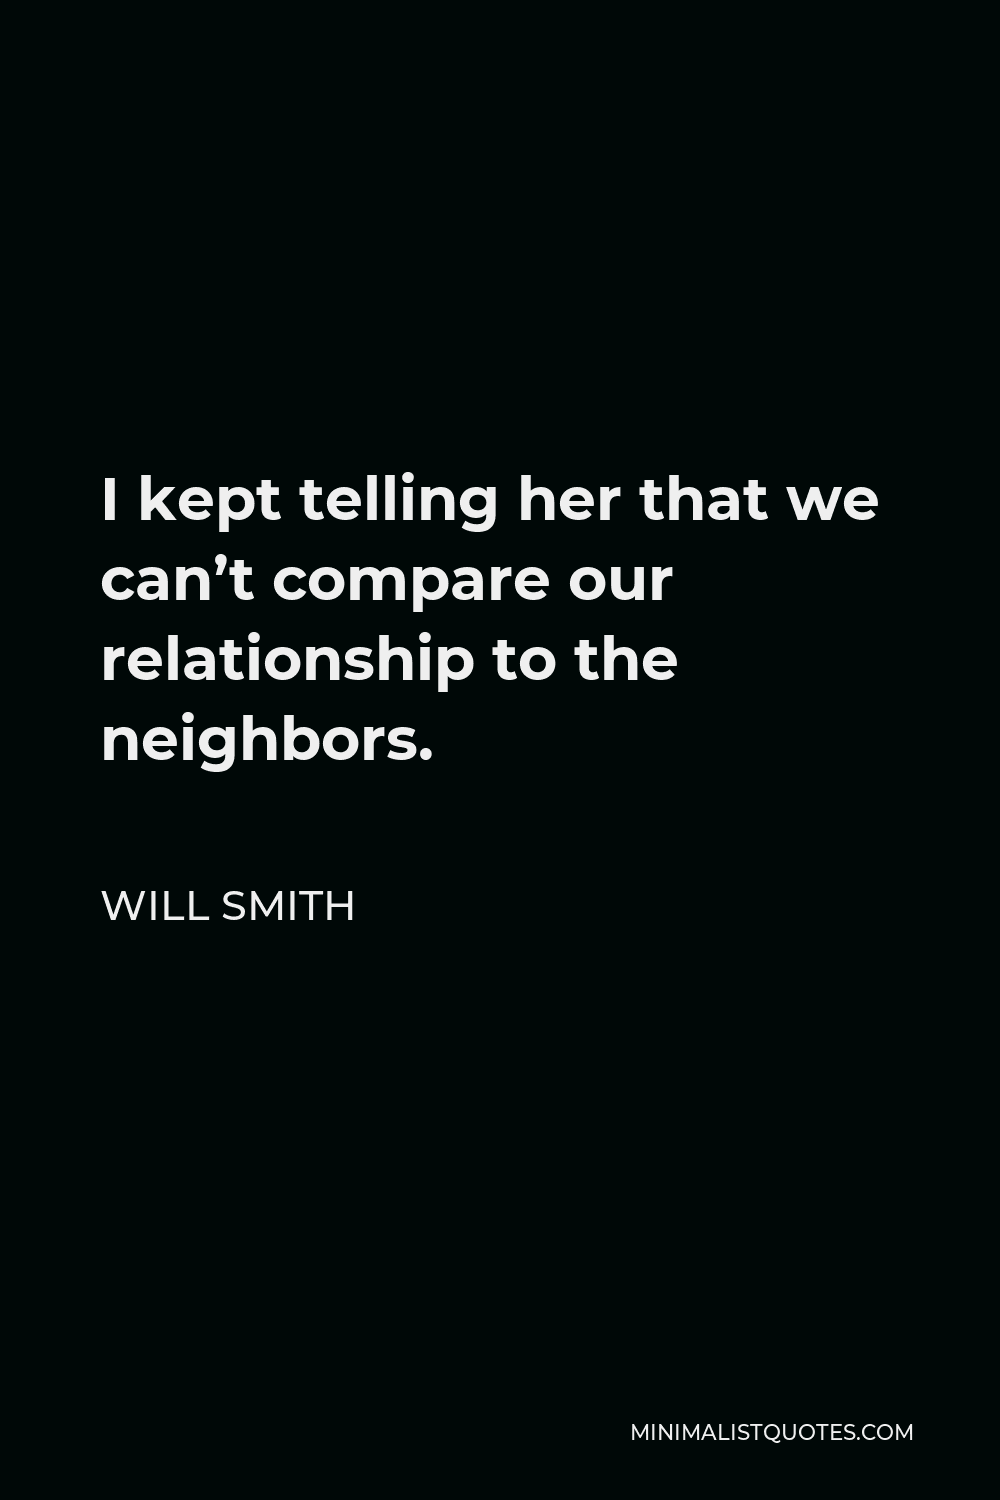 Will Smith Quote - I kept telling her that we can’t compare our relationship to the neighbors.